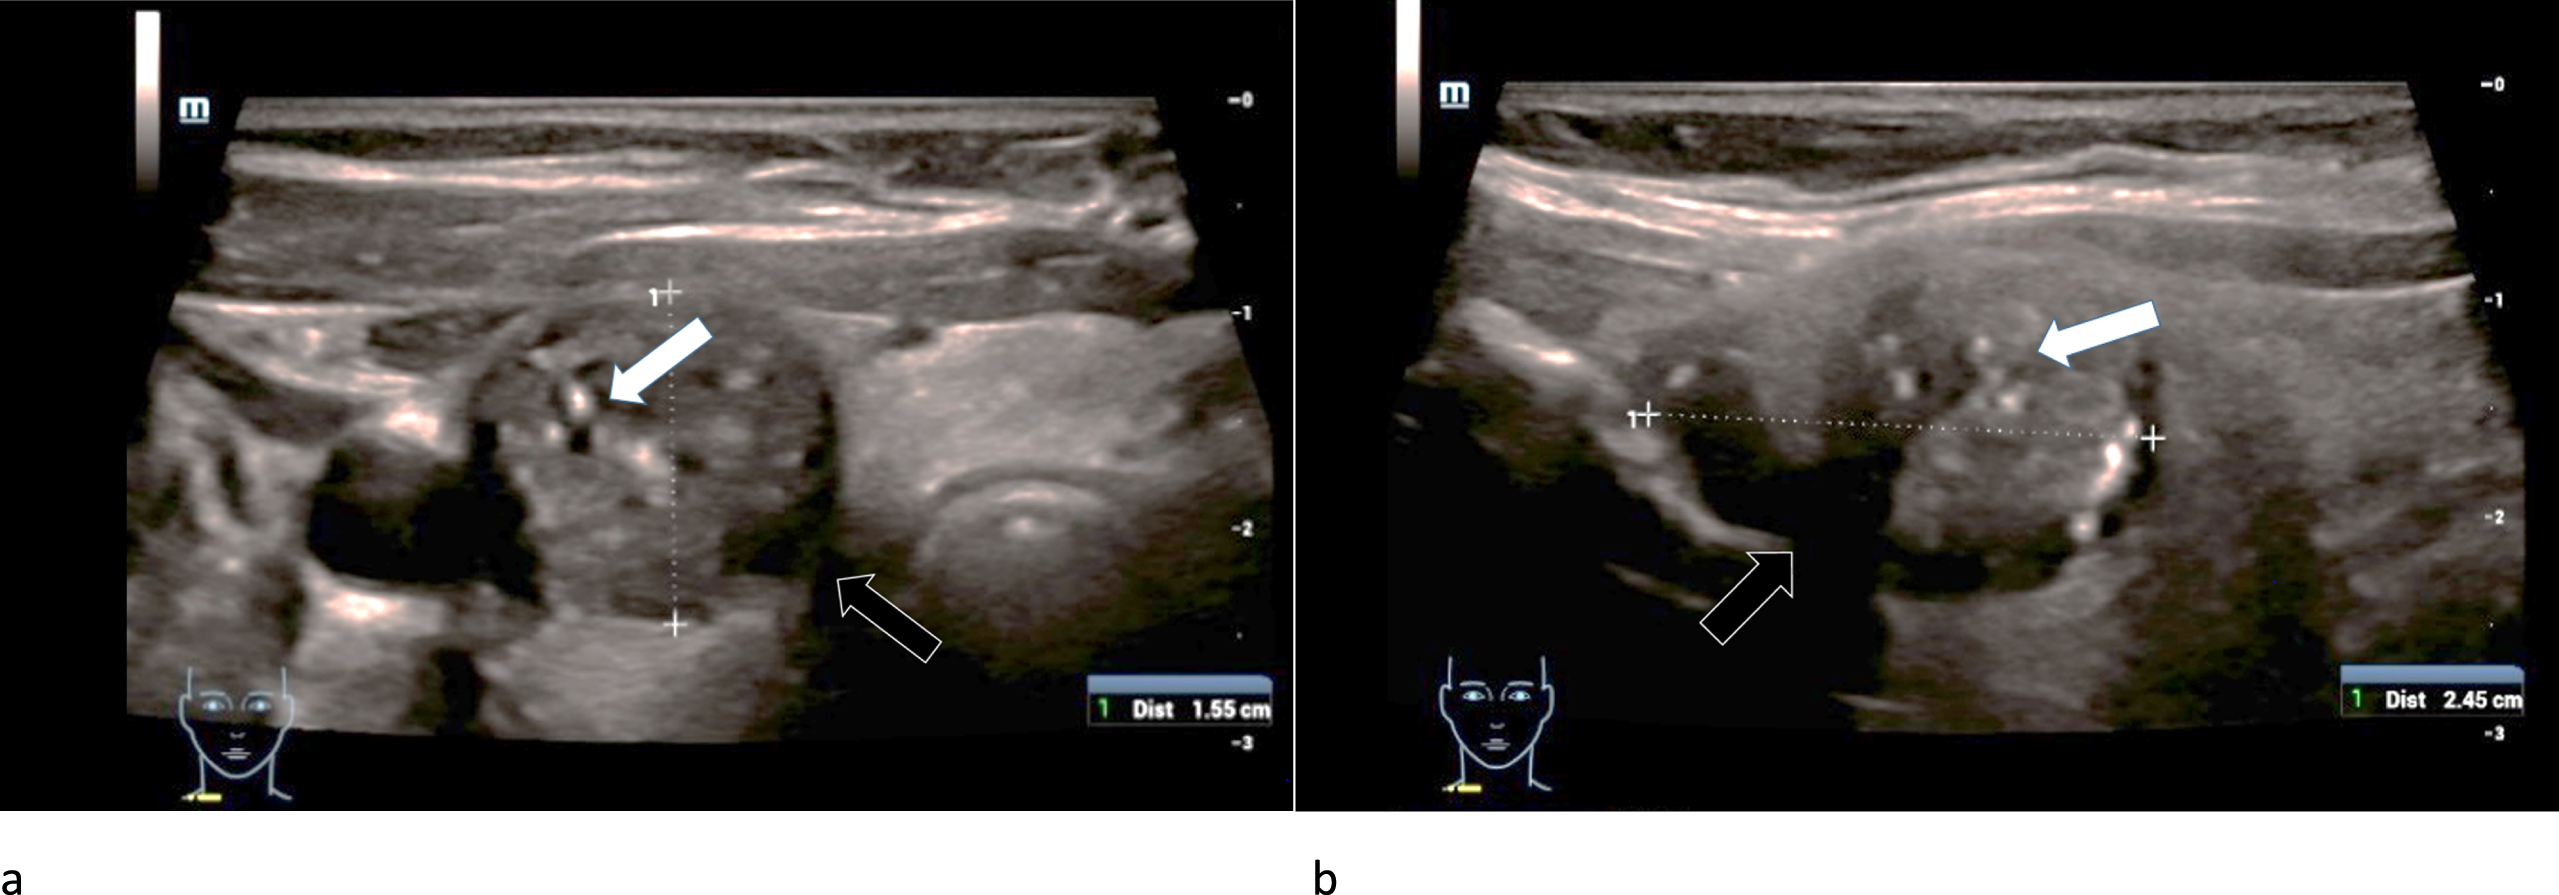 B-mode examination of a right thyroid lobe in cross section (left/a) and longitudinal view (right/b) of a 69-year-old patient with histo-pathologically proven papillary thyroid cancer. Micro-calcifications (white arrows), a diffuse, incomplete margin (black arrows) and a marginal notably reduced echogenicity compared to the surrounding thyroid tissue can be found. These are B-mode signs for malignancy.